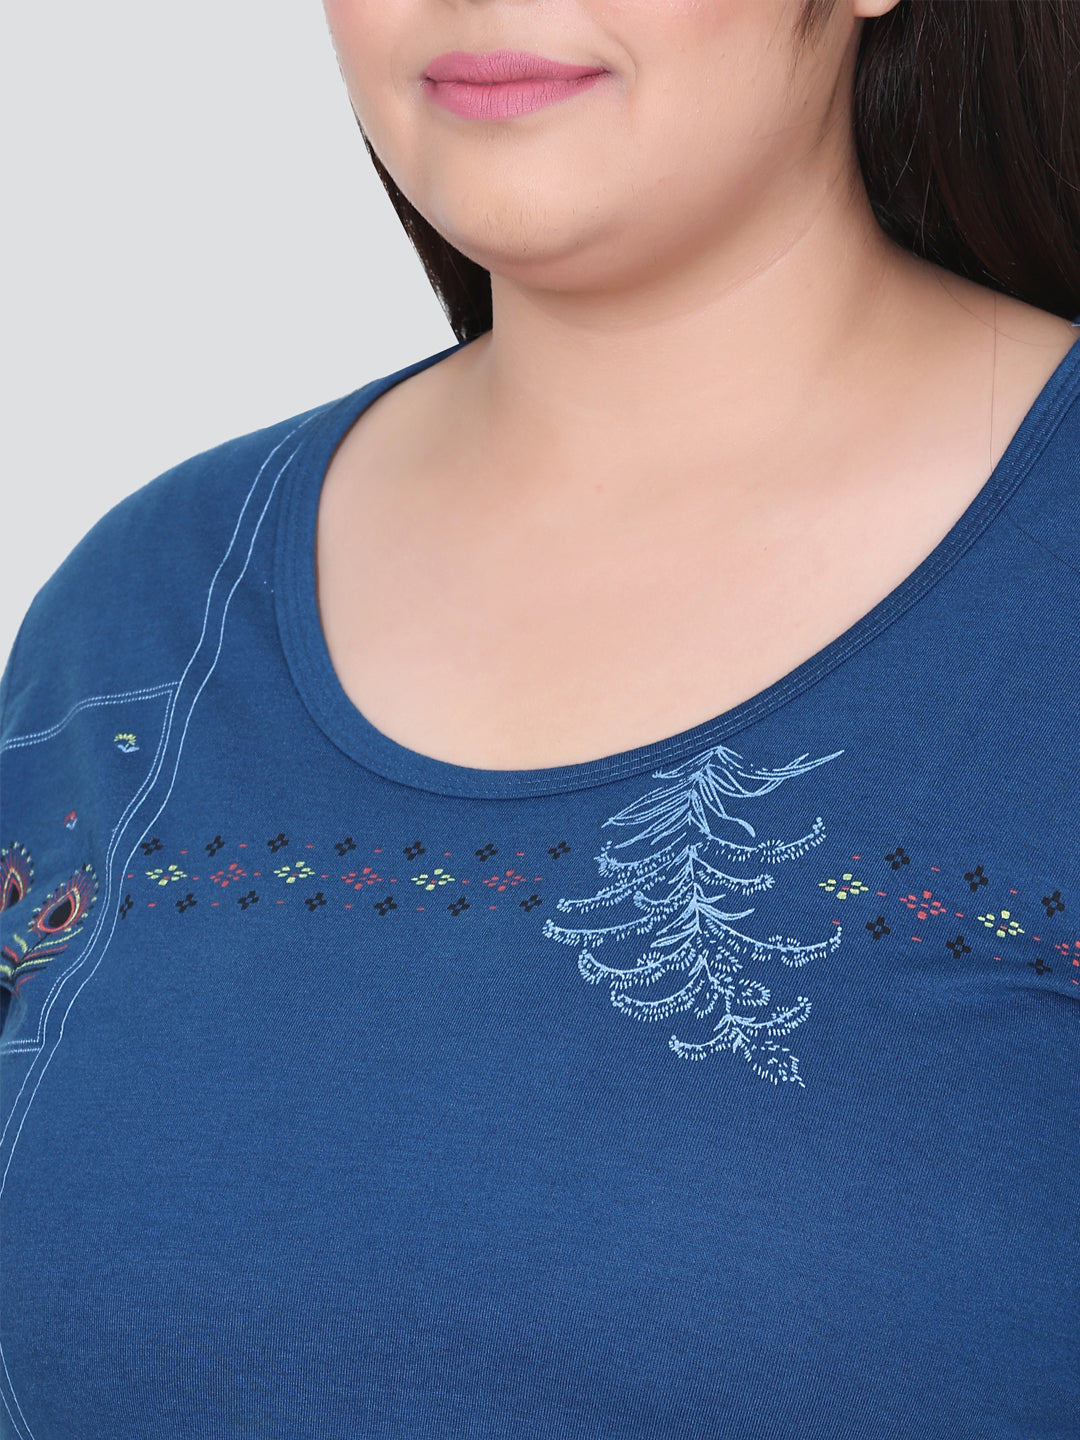 Cotton Long Top for Women Plus Size - Full Sleeves - Teal Blue